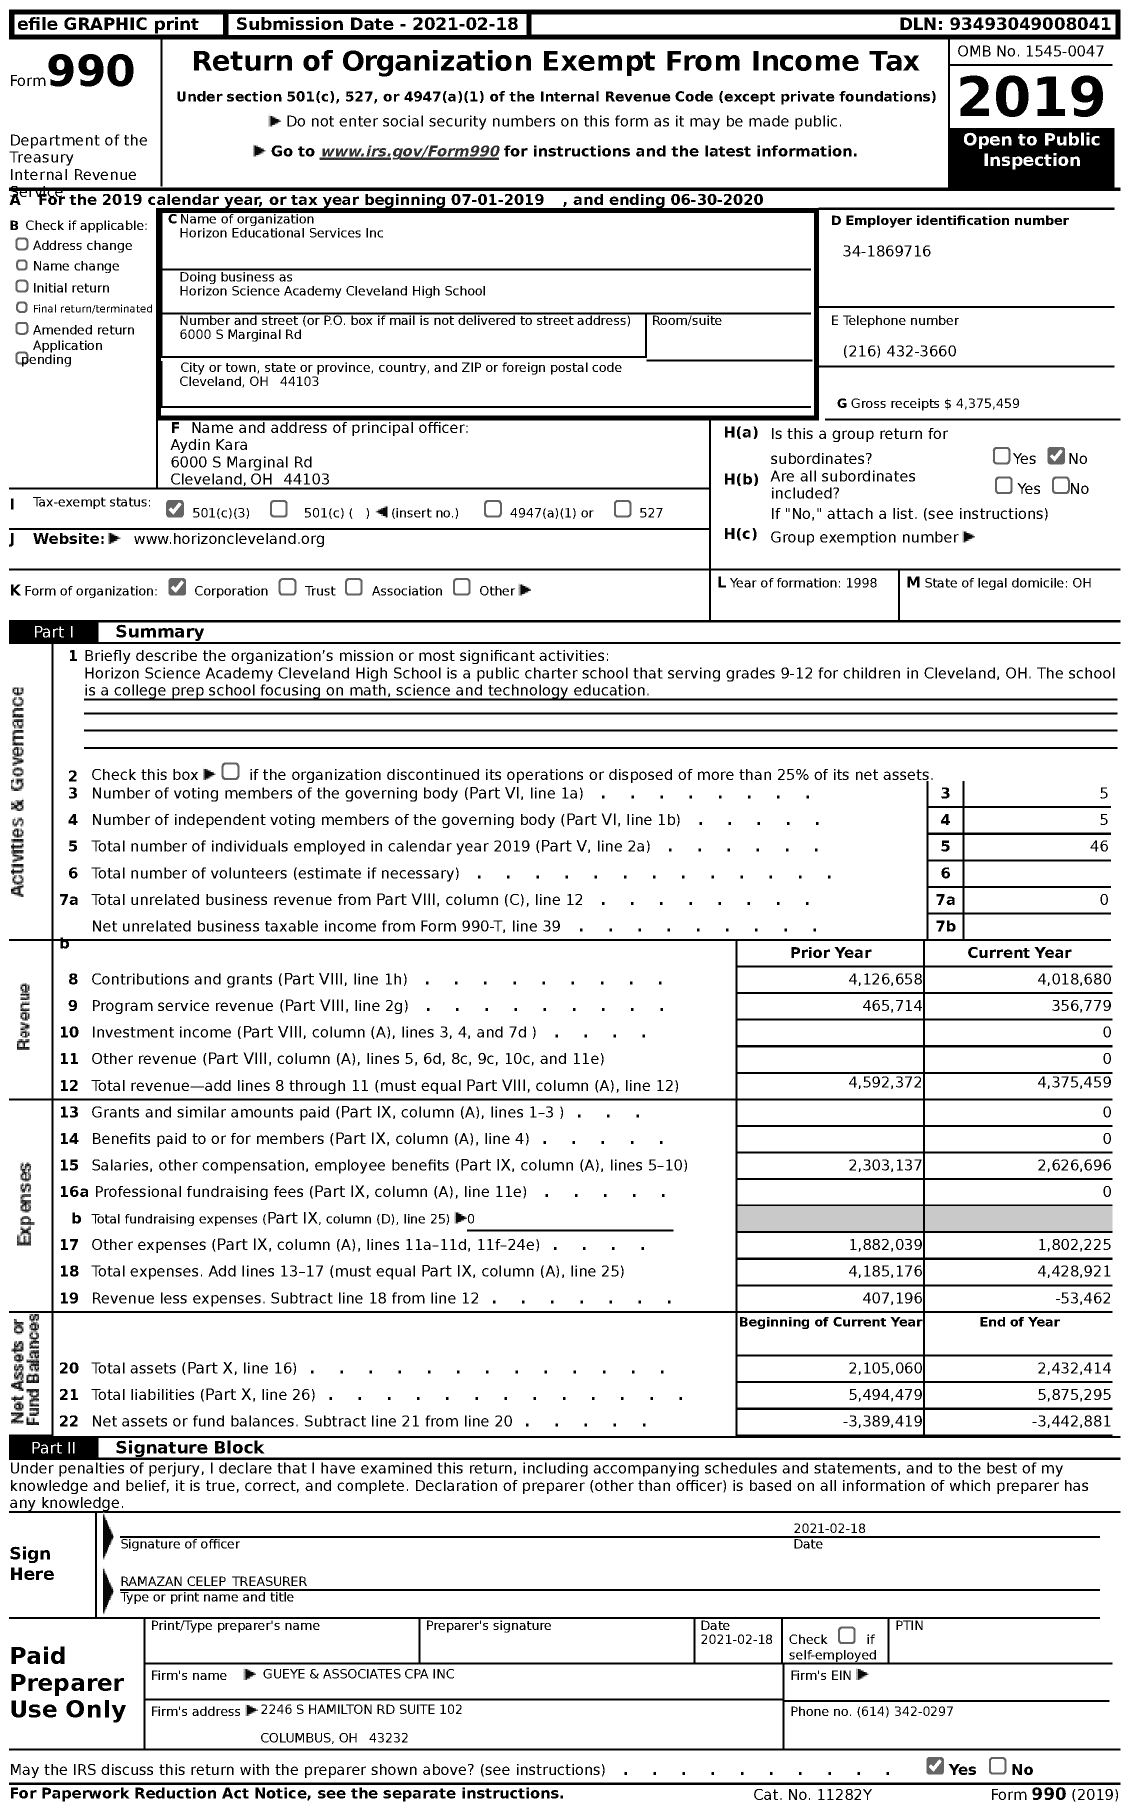 Image of first page of 2019 Form 990 for Horizon Science Academy Cleveland High School